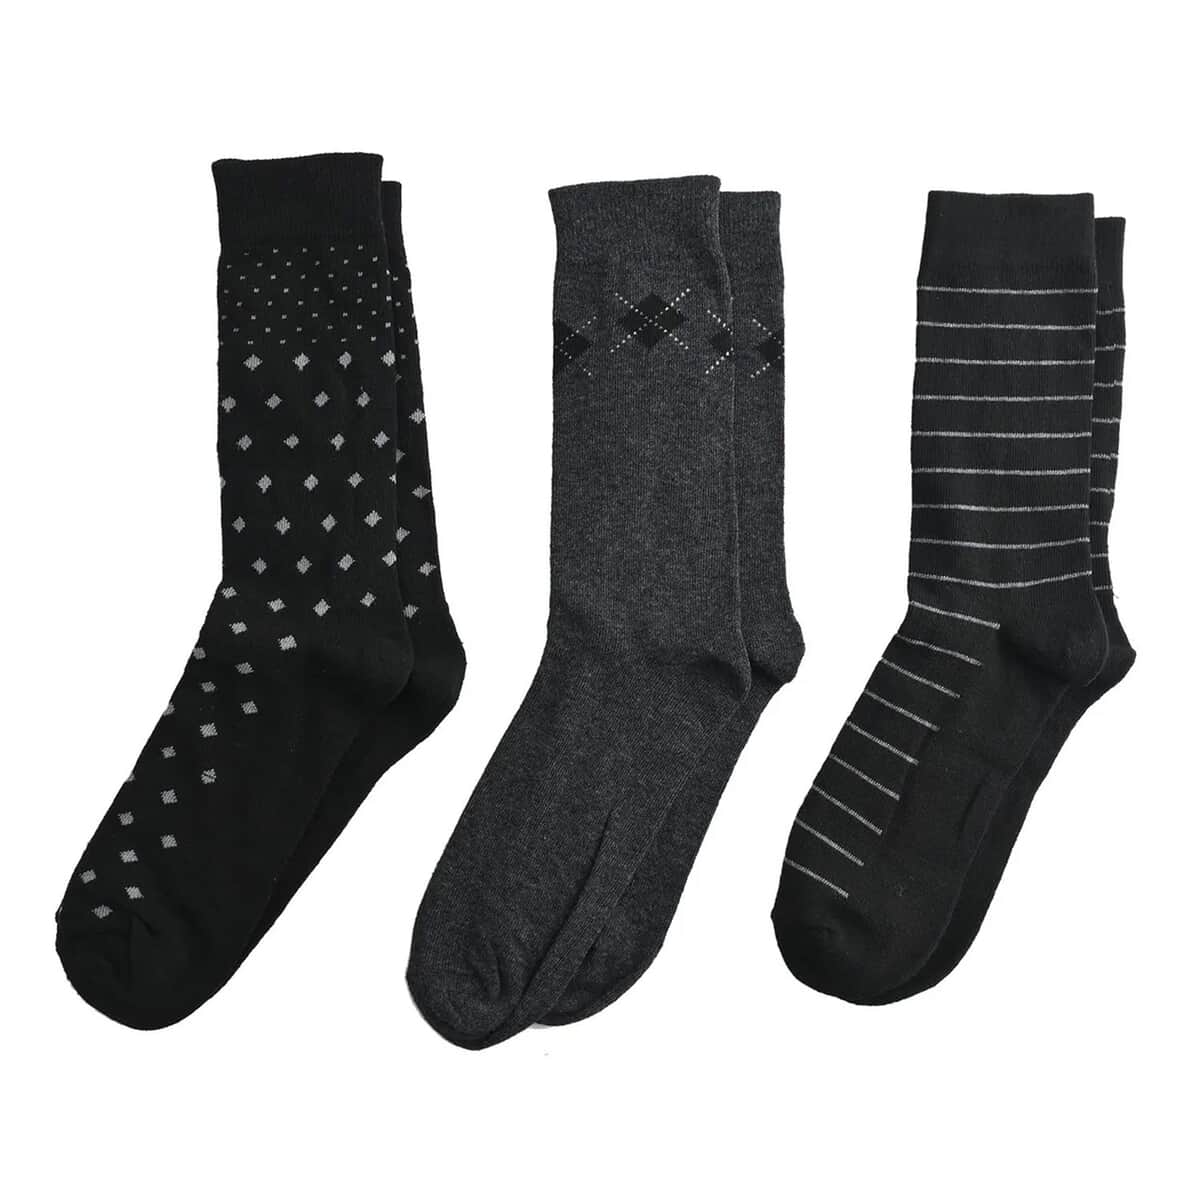 Marco Cavelli Black and Gray Set of 3 Men's Dress Socks, Breathable and Soft Socks for Men, Polyester and Cotton Socks, image number 4